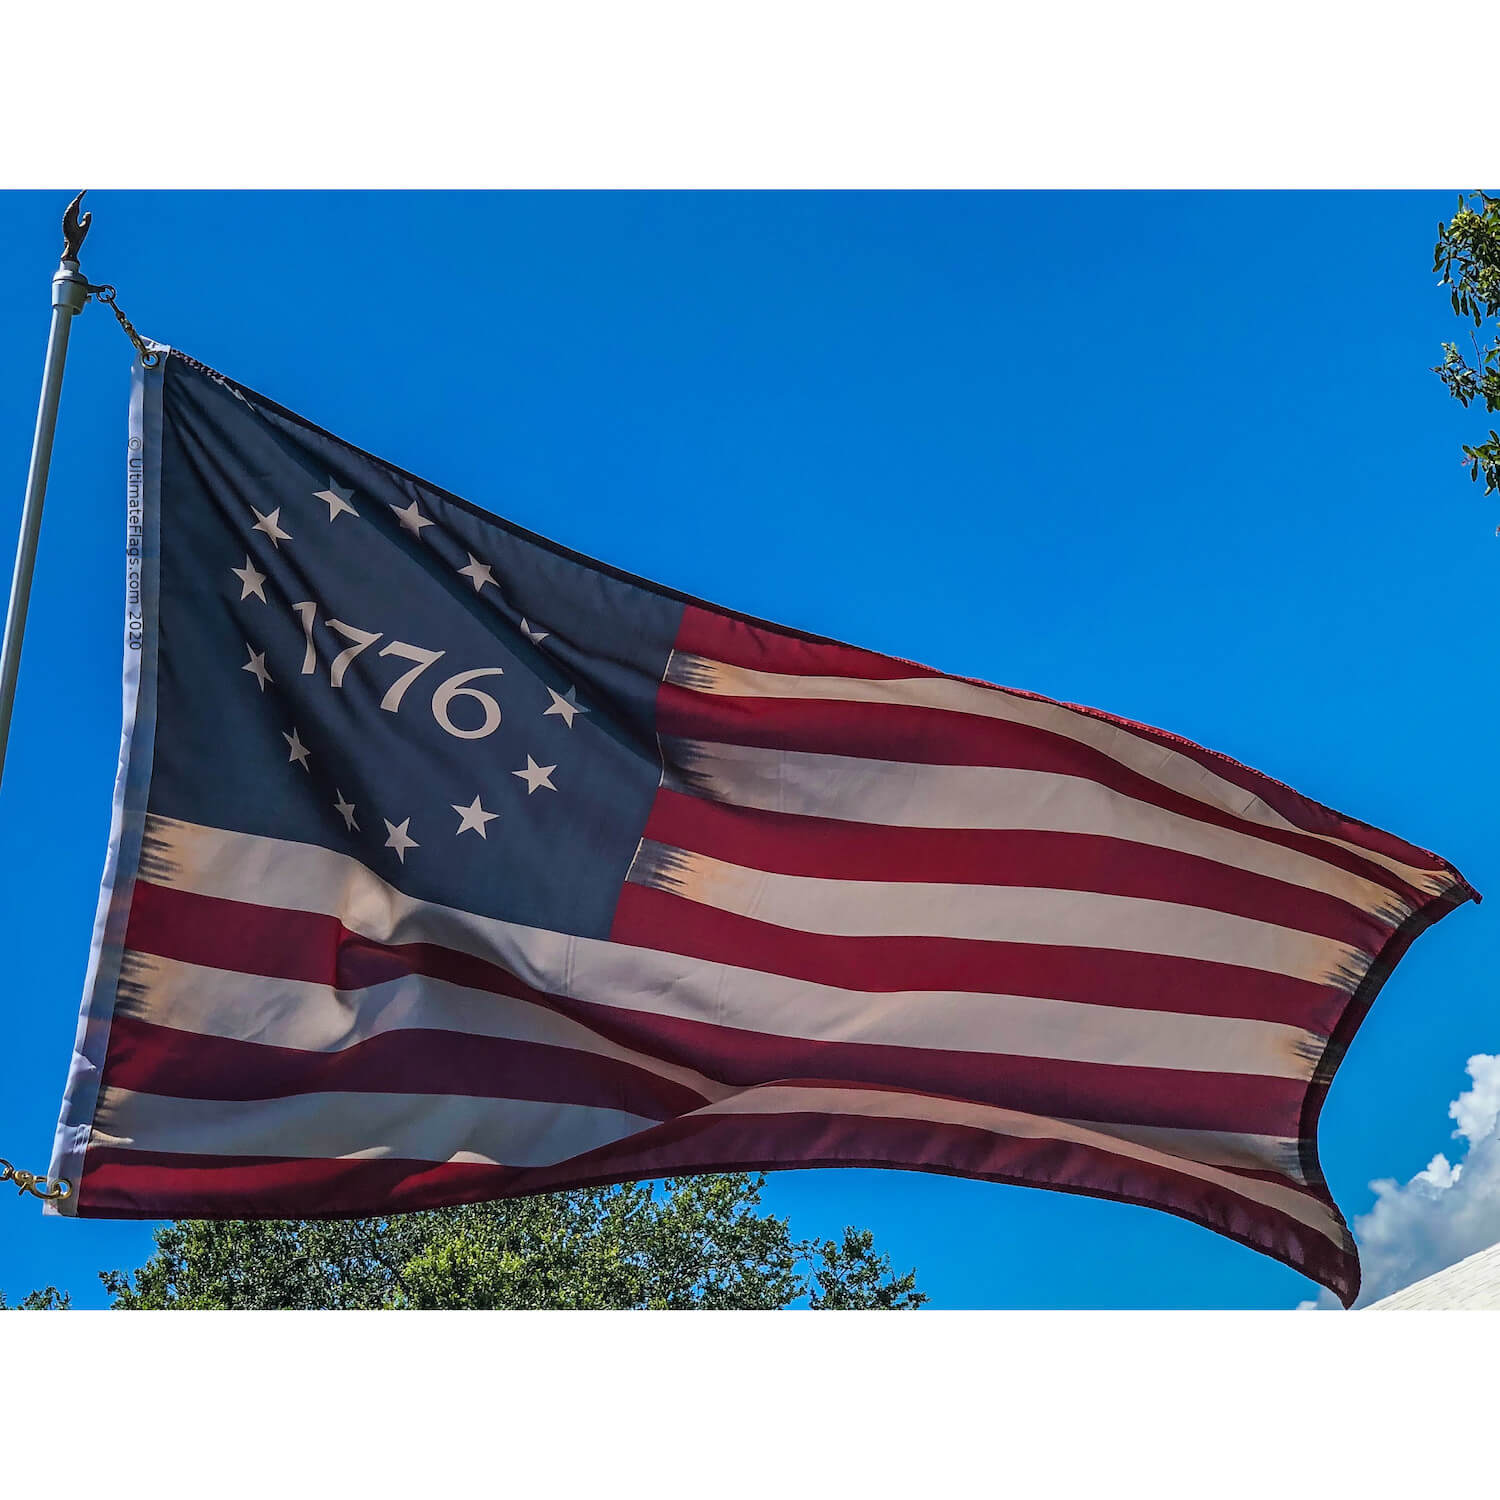 Ultimate Flags Inc: A Beacon of American Traditions